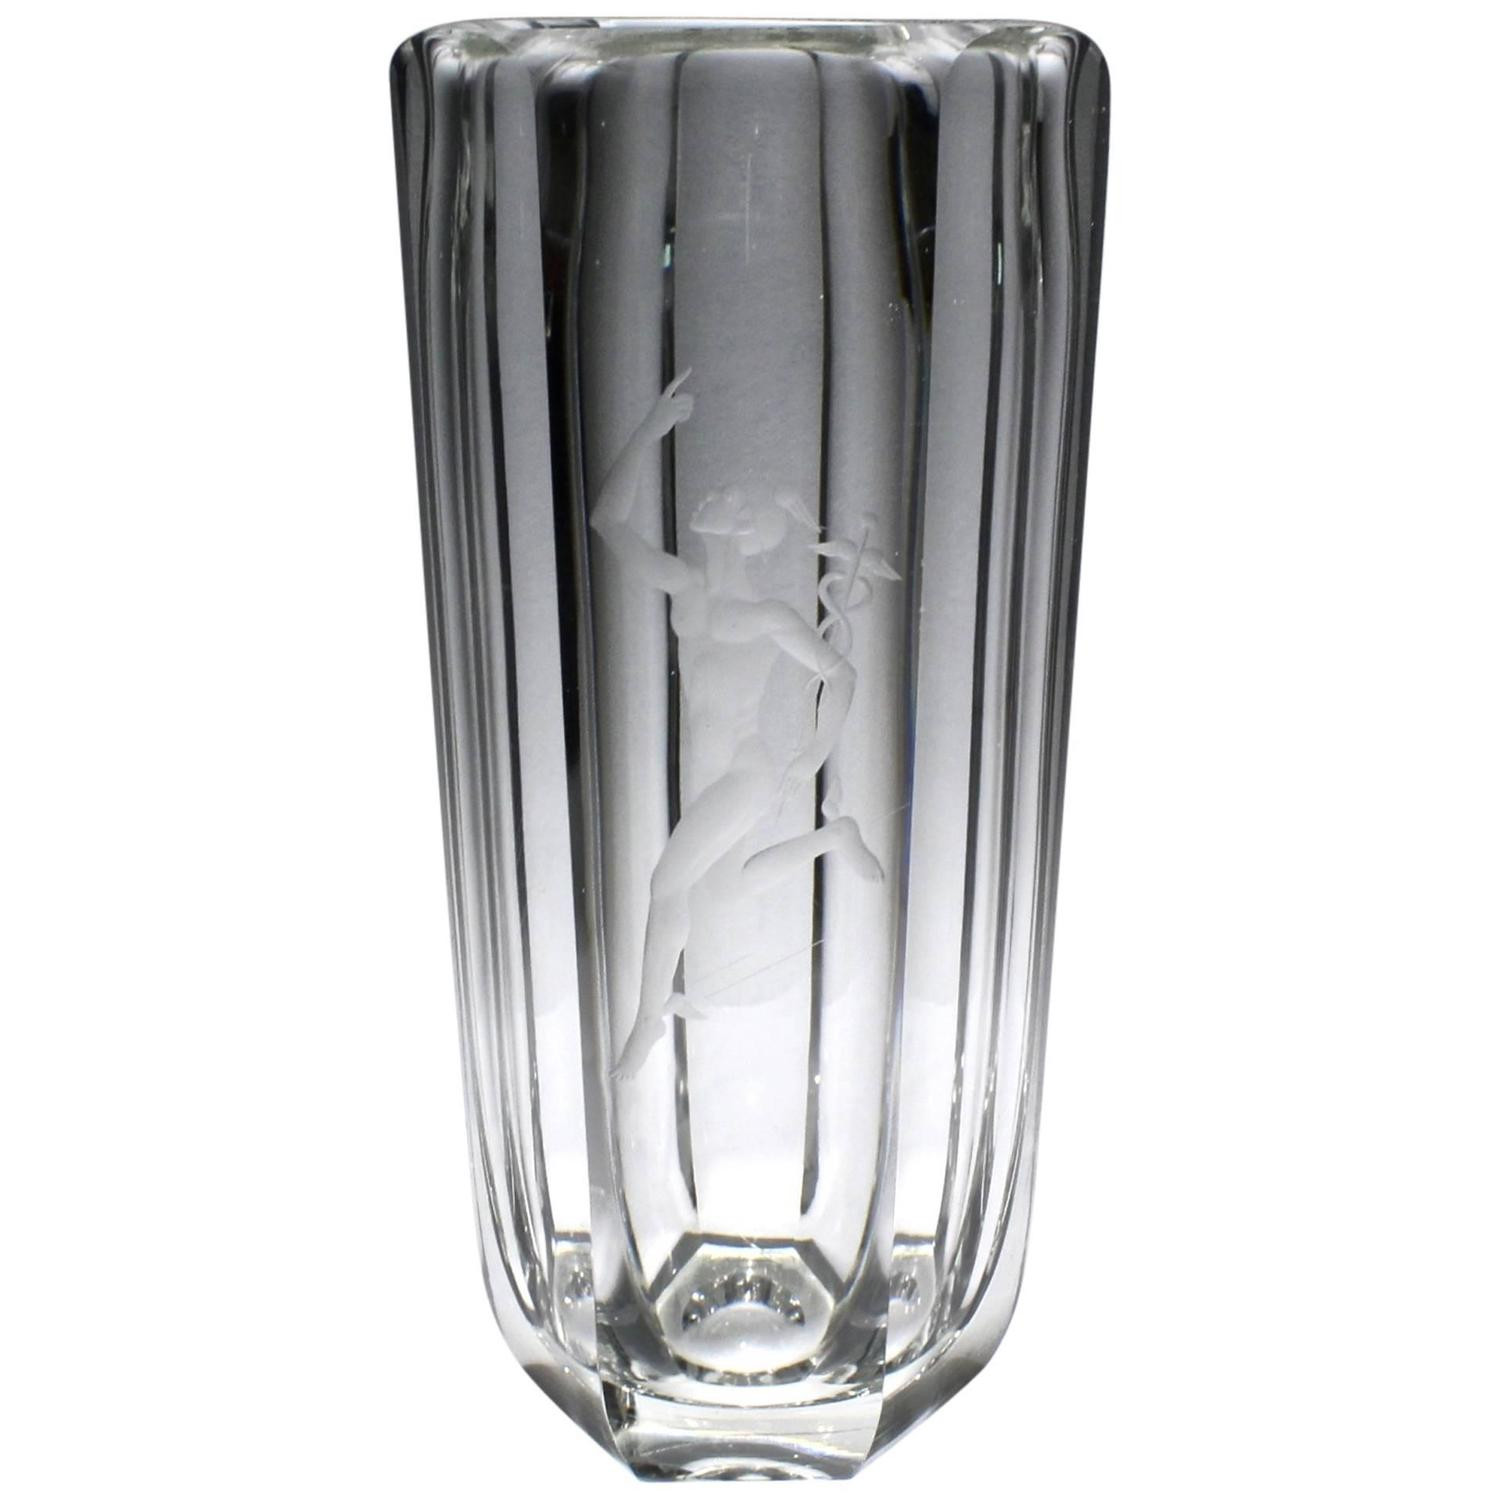 19 Stylish Kosta Boda Caramba Vase 2024 free download kosta boda caramba vase of kosta boda the clear sticker now used today with a san serif in large faceted art deco vase with engraved mercury by elis bergh for kosta boda